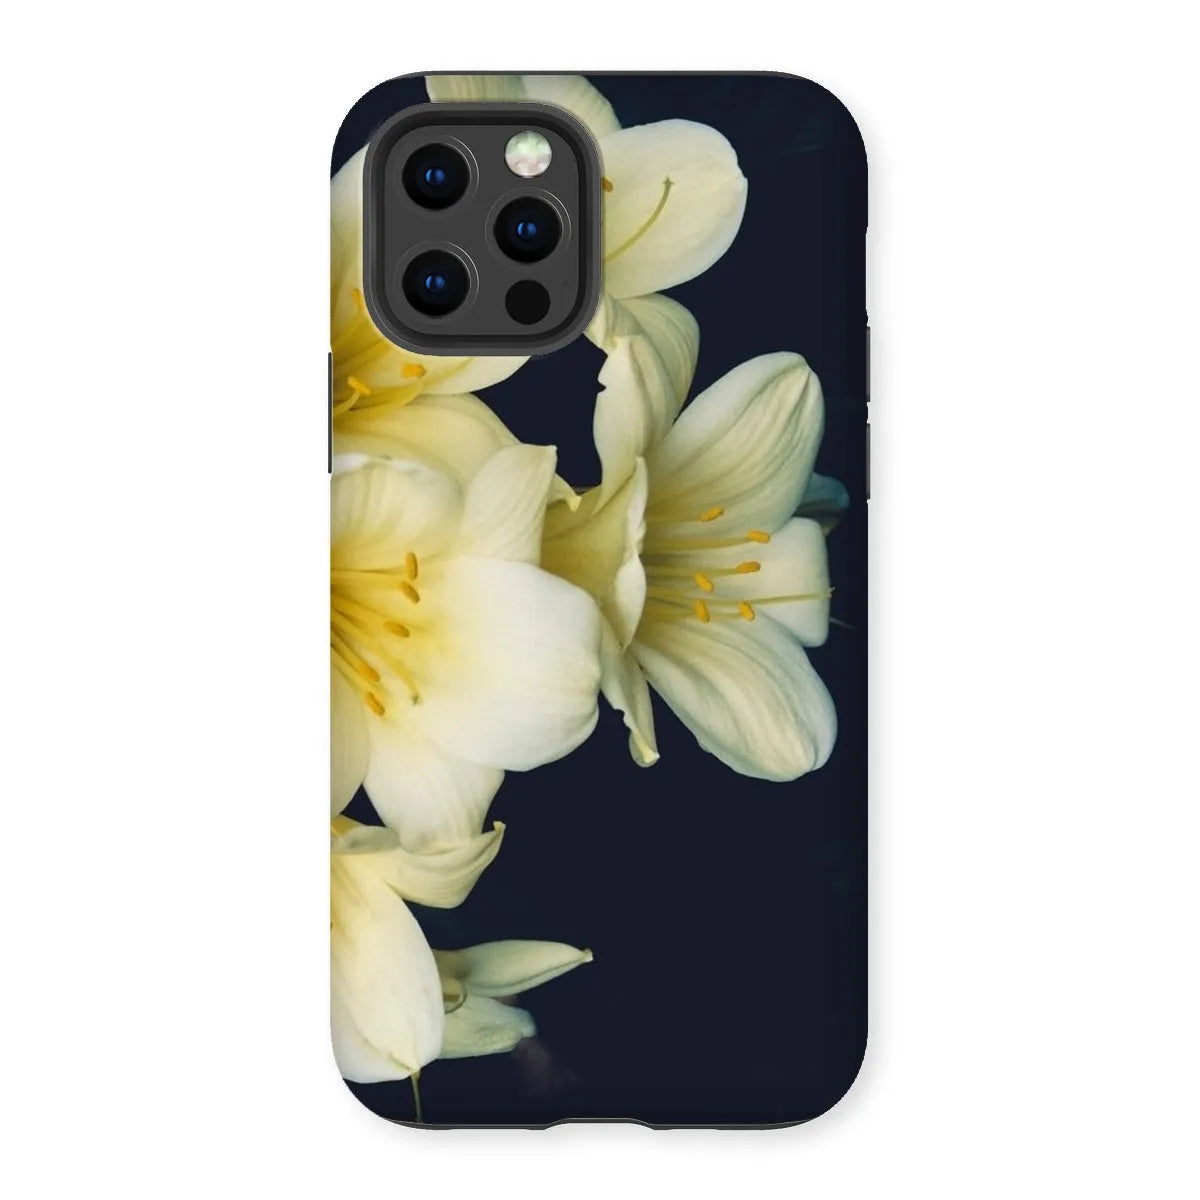 Flower Power Too Tough Phone Case - Iphone 12 Pro / Matte - Mobile Phone Cases - Aesthetic Art